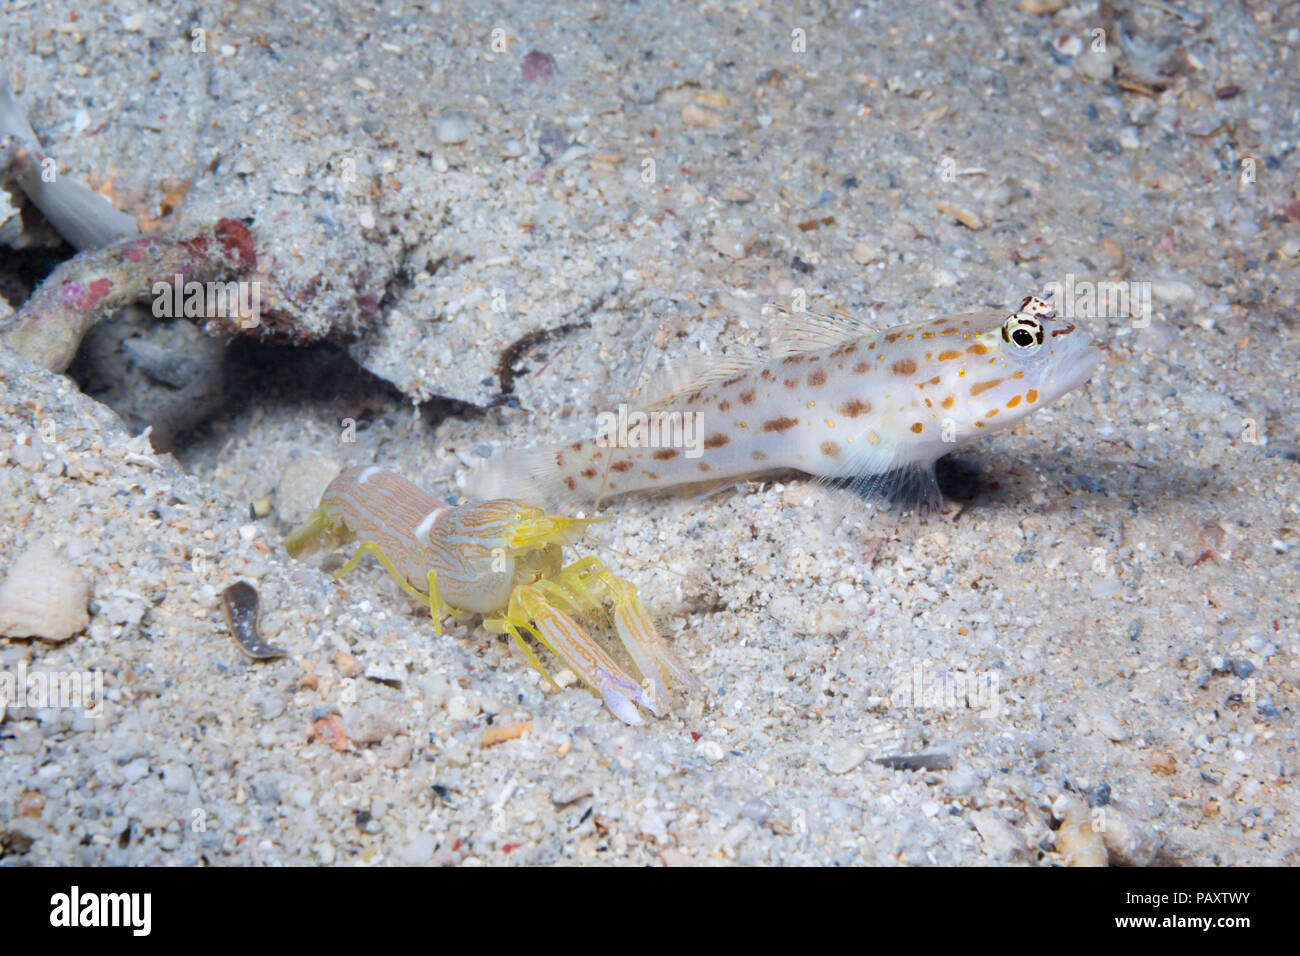 Saffron Shrimp-goby, Ctenogobiops crocineus, living in a symbiotic relationship with a blind snapping shrimp, Alpheus ochrostriatus. As pictured here, Stock Photo